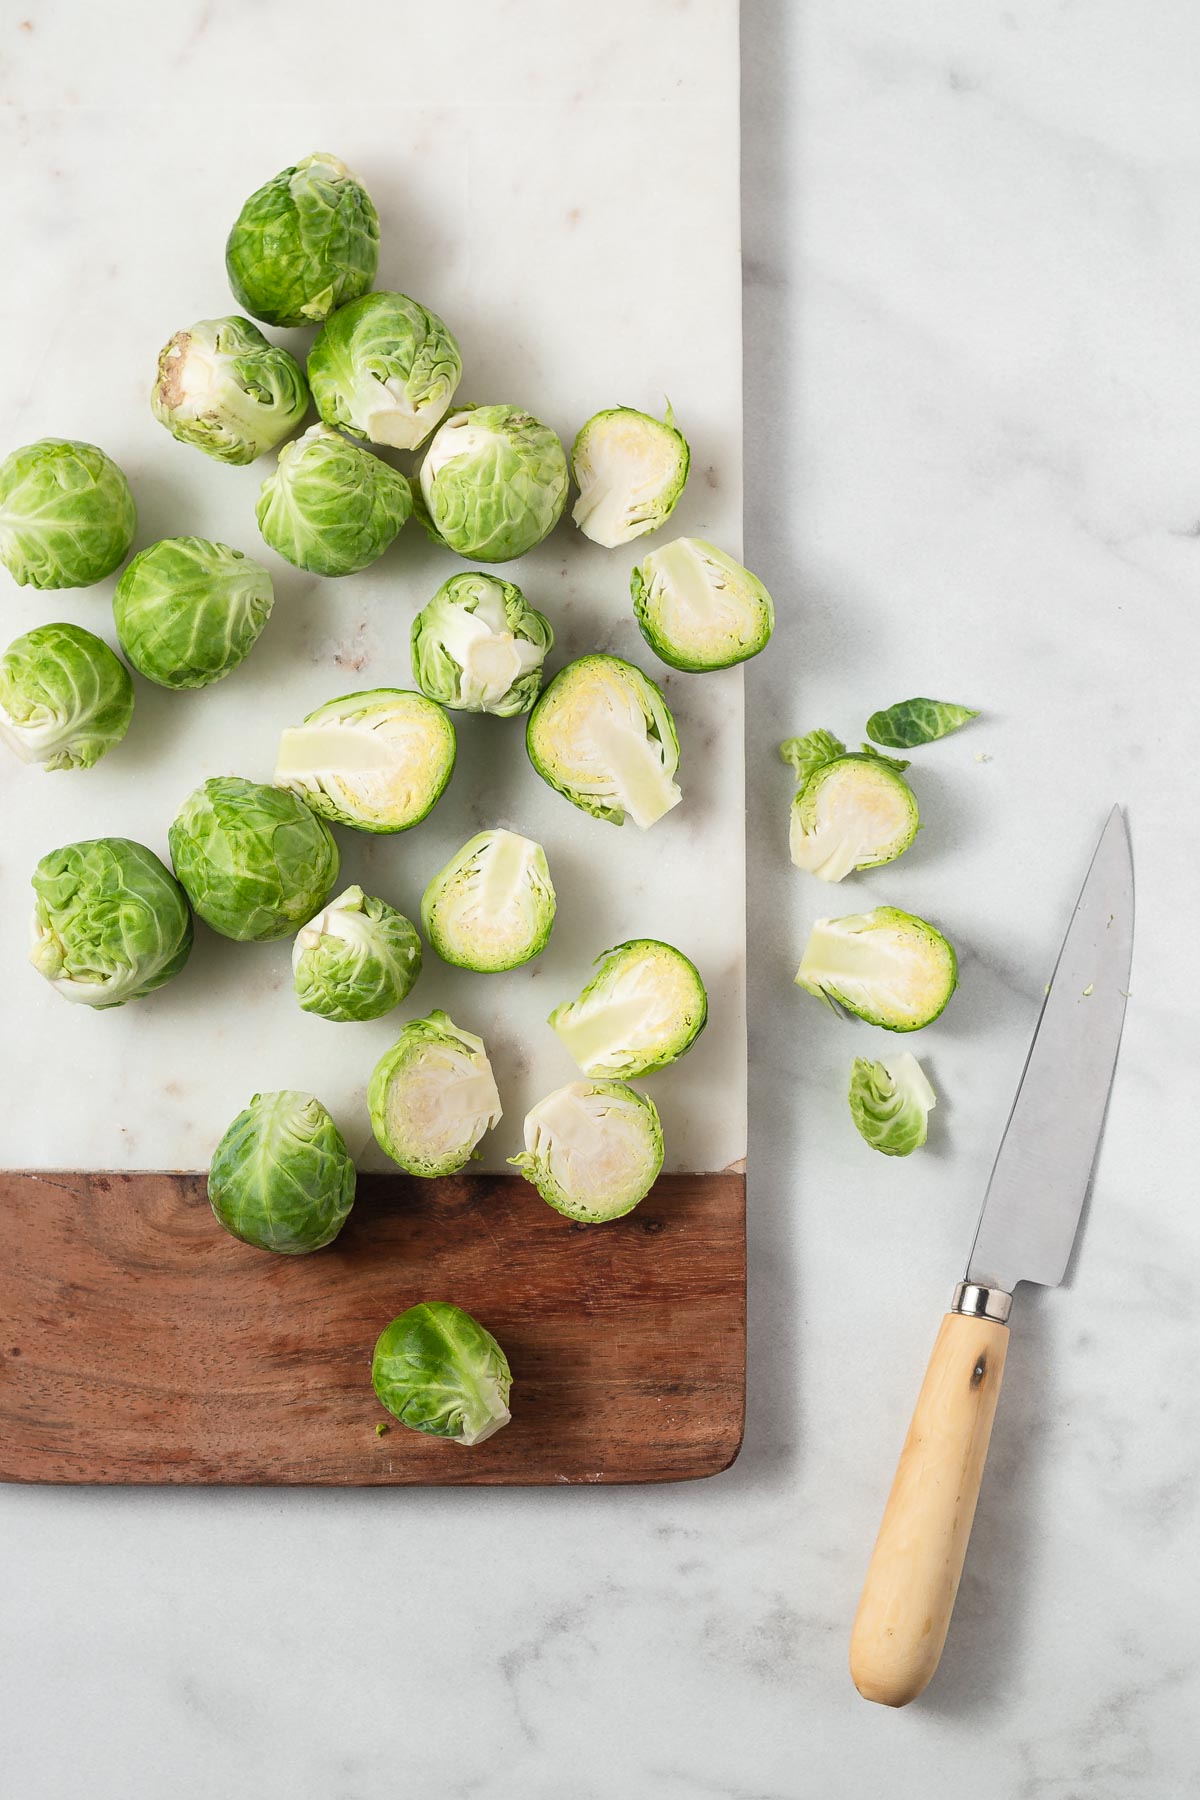 trimmed and cut brussel sprouts